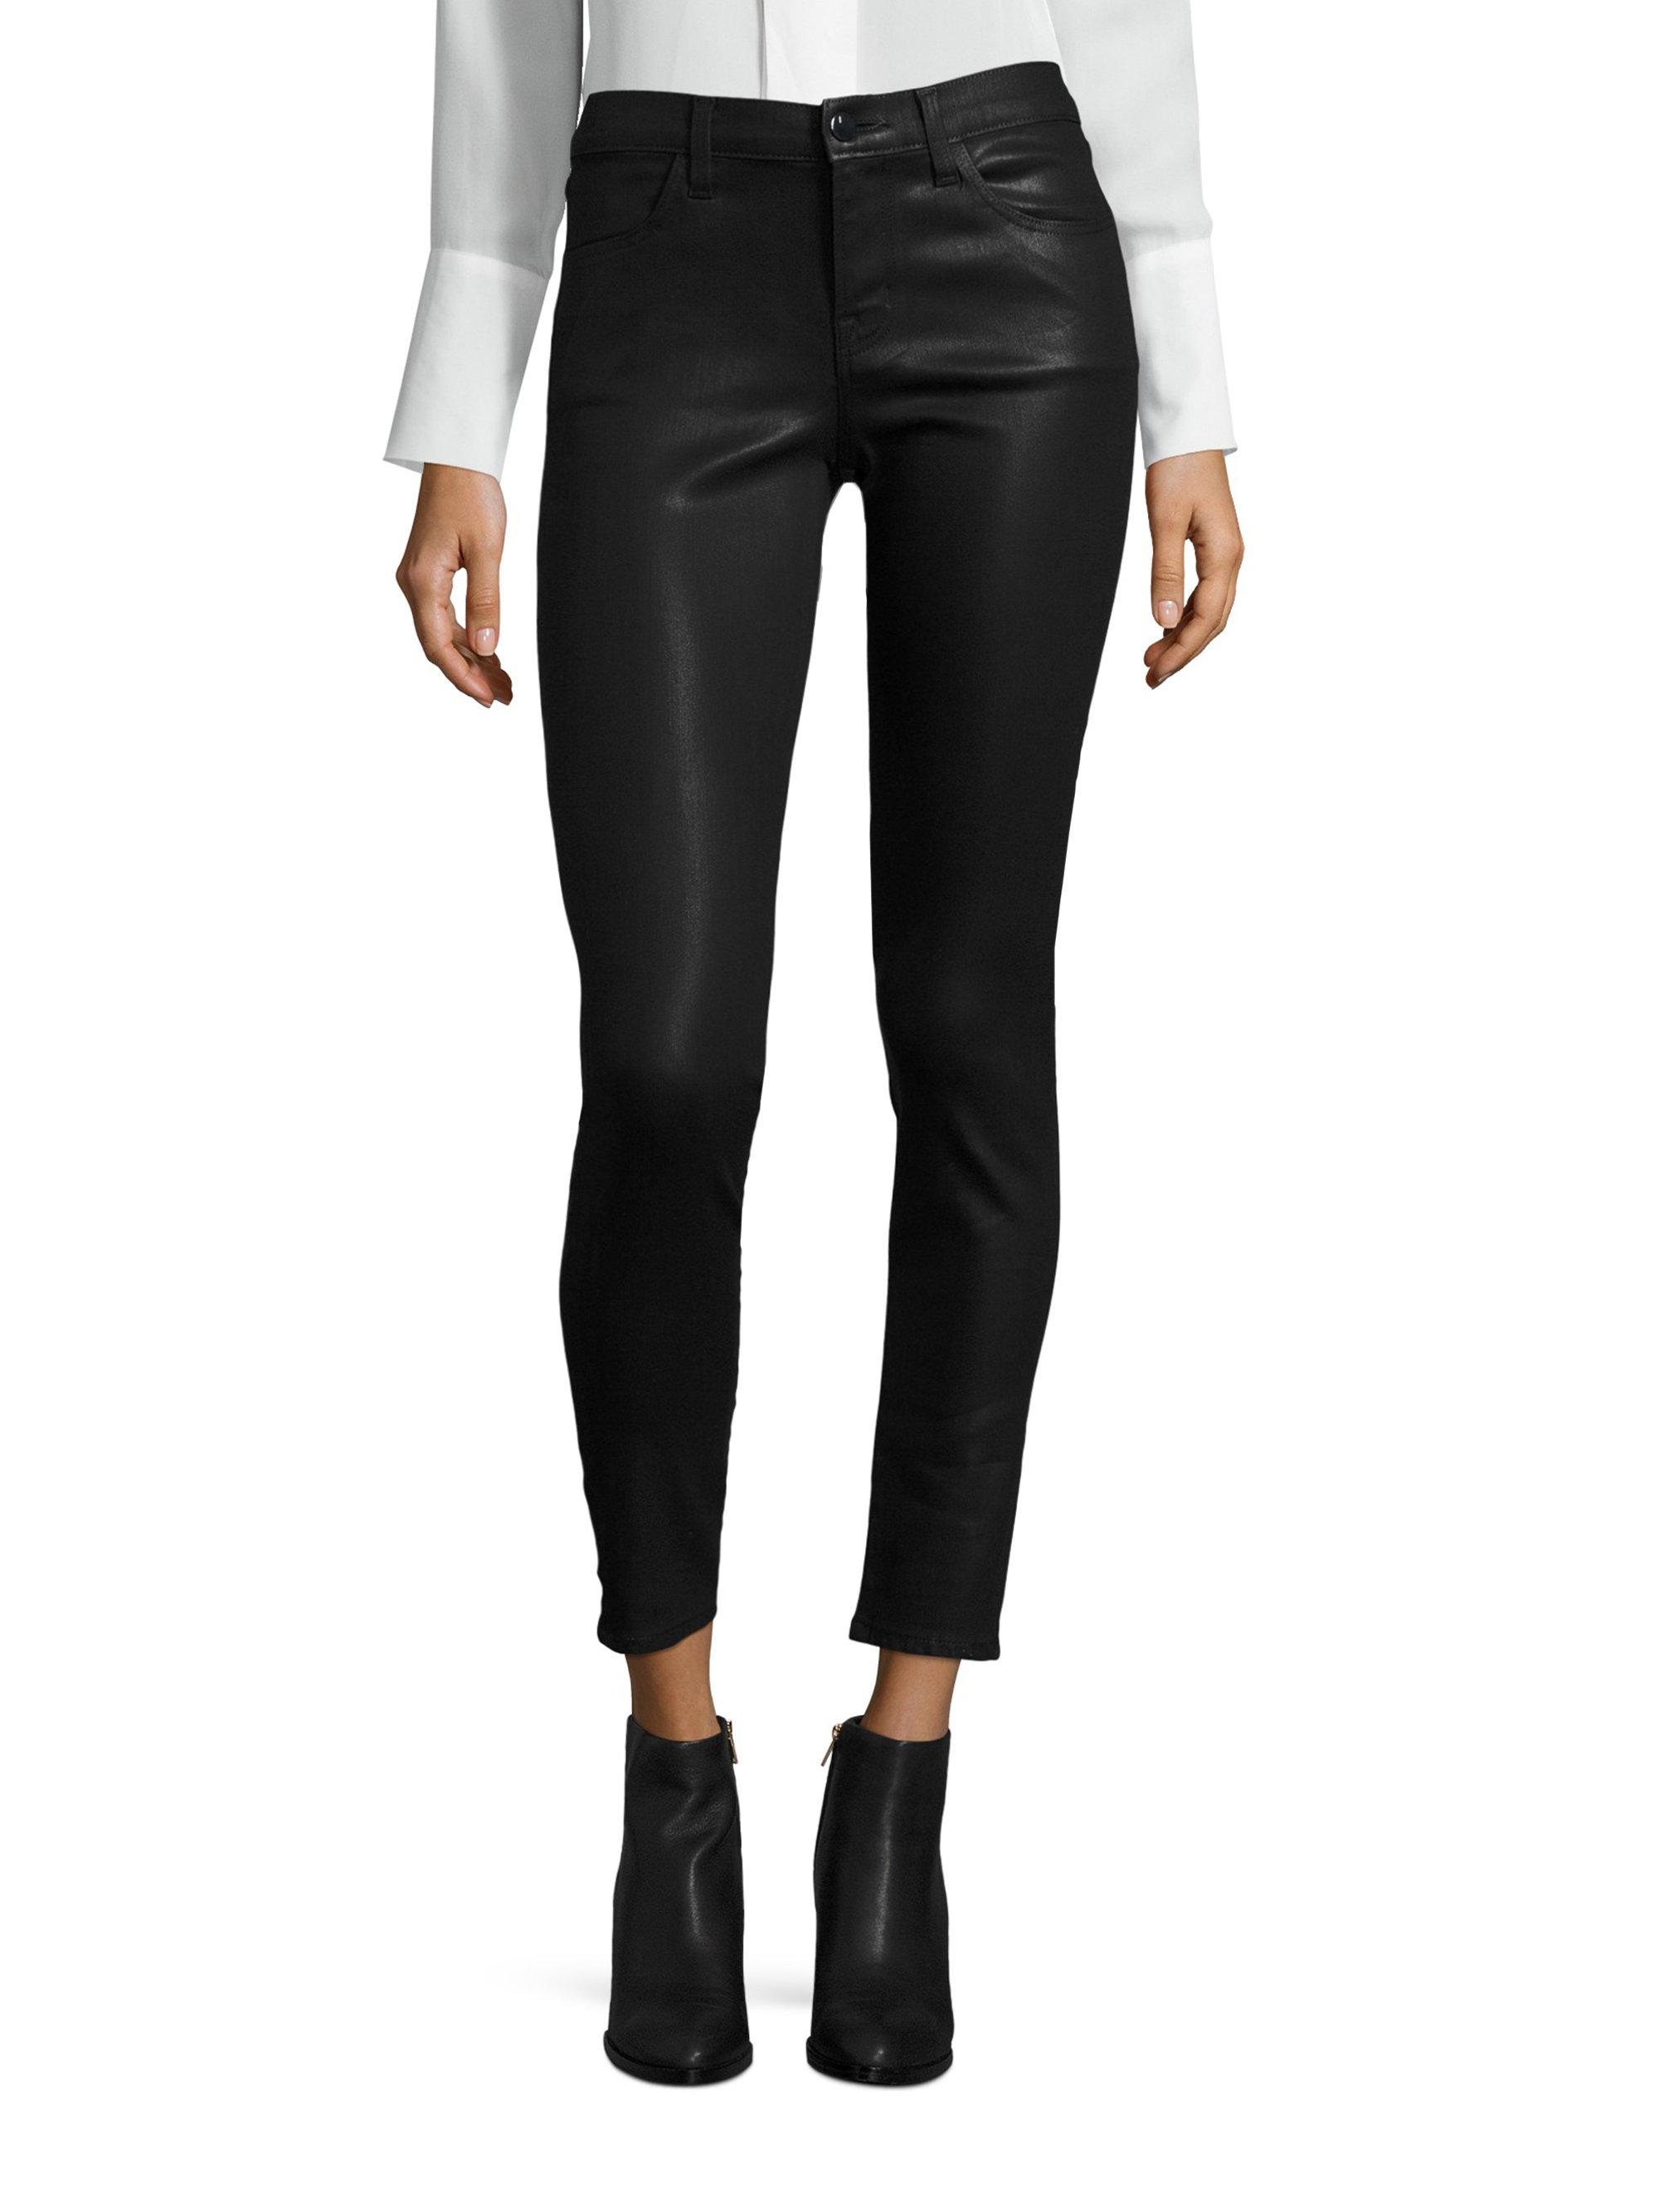 Lyst - J brand 620 Mid-rise Coated Skinny Jeans in Black